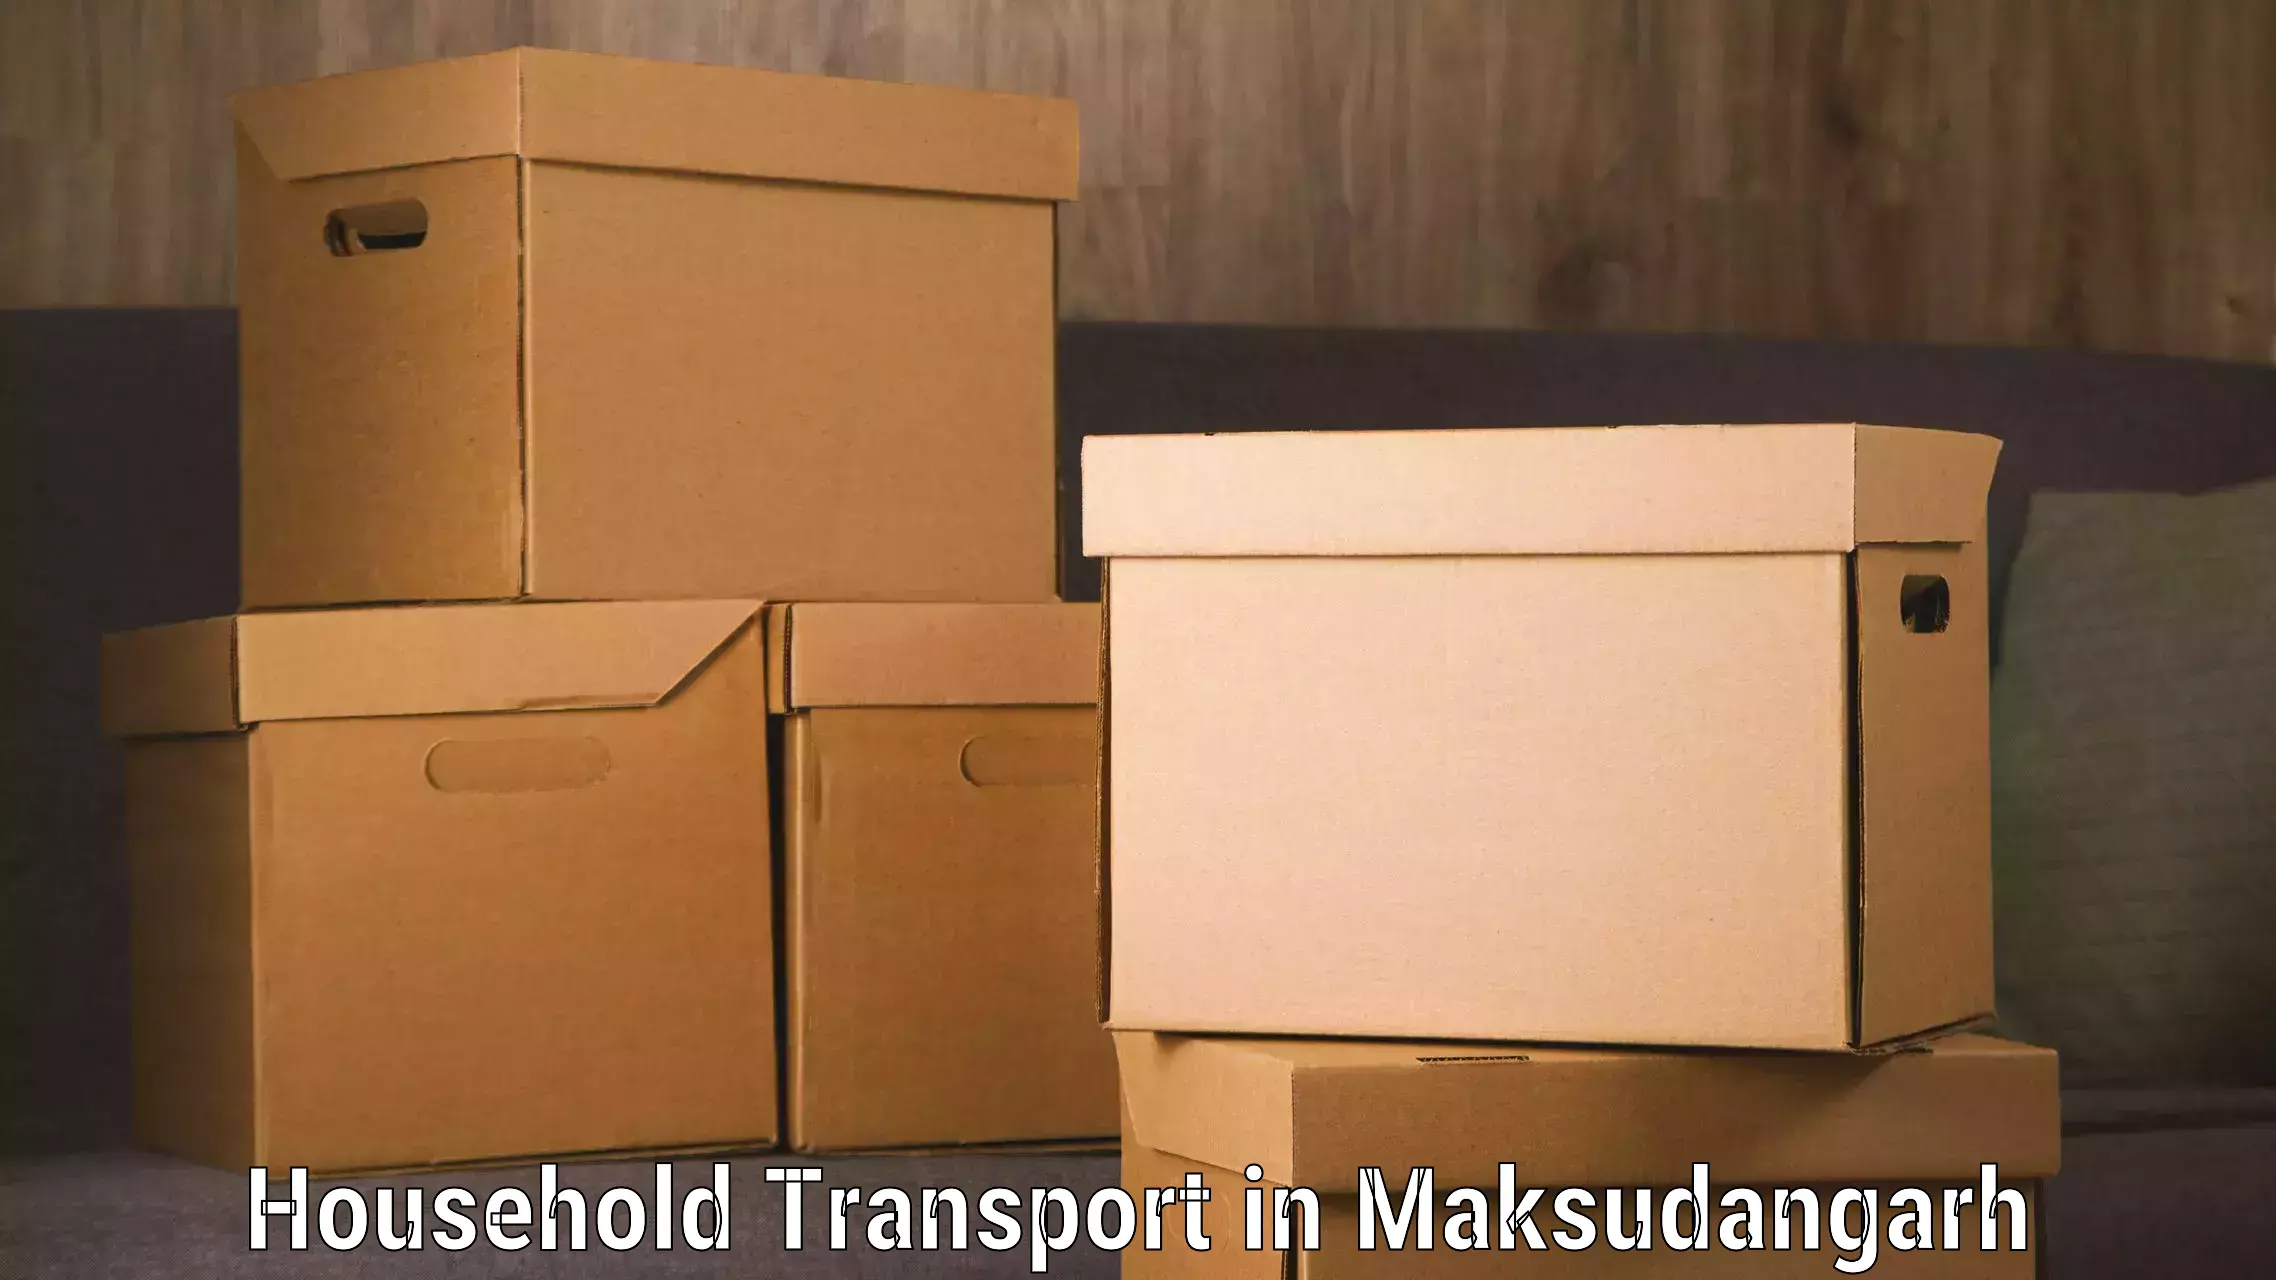 Quality moving and storage in Maksudangarh